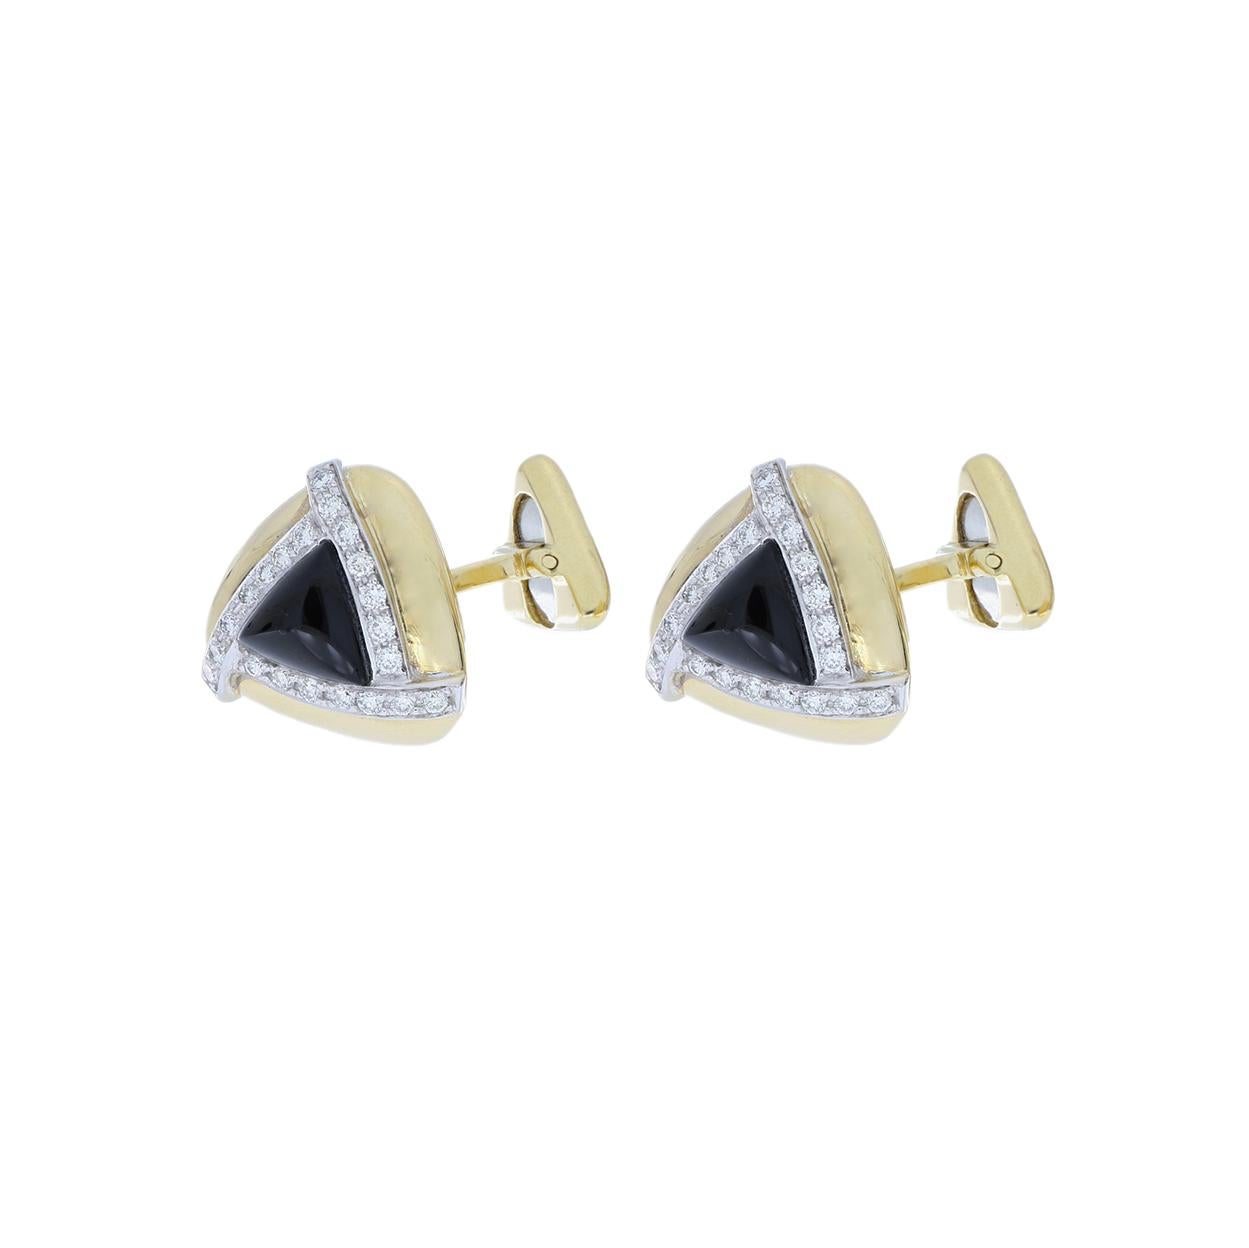 Man's Onyx and White Diamonds Wedding Cufflinks in 18 K Yellow Gold For Sale 2